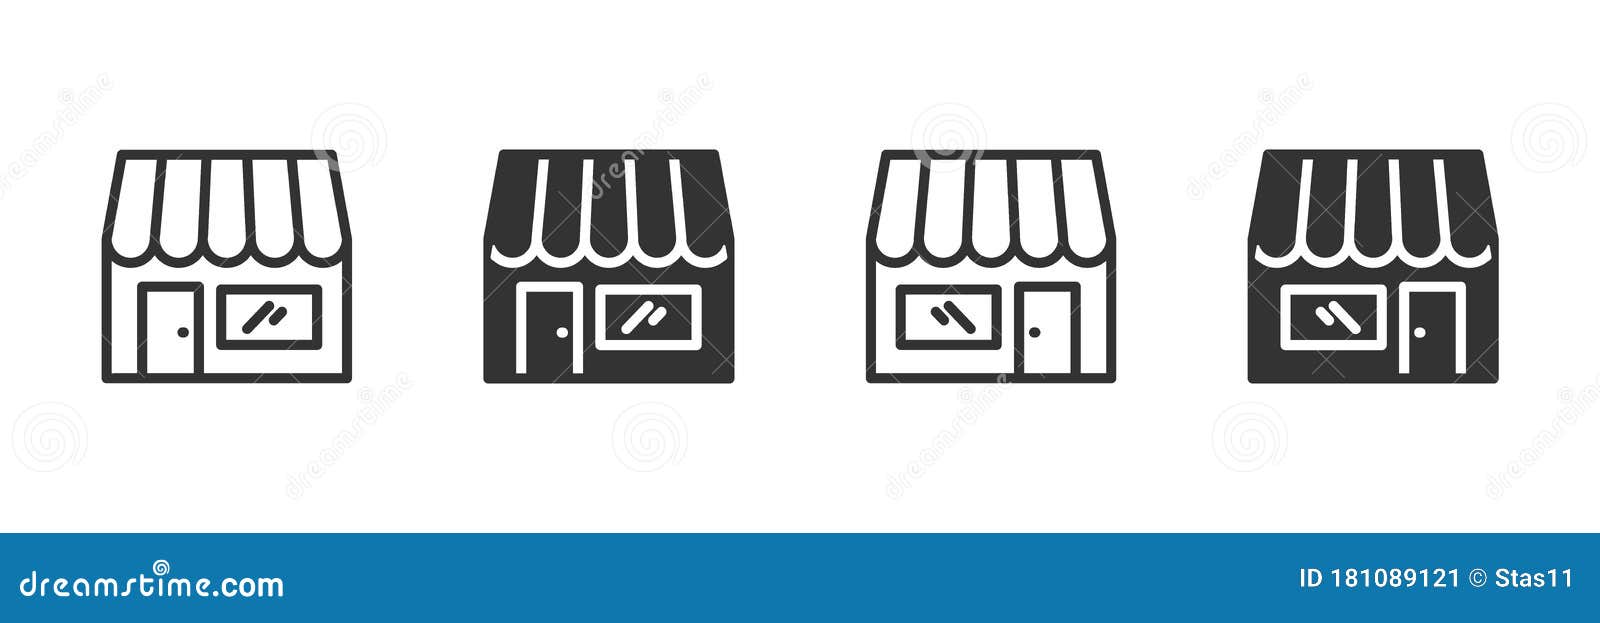 store icons in four different versions in a flat 